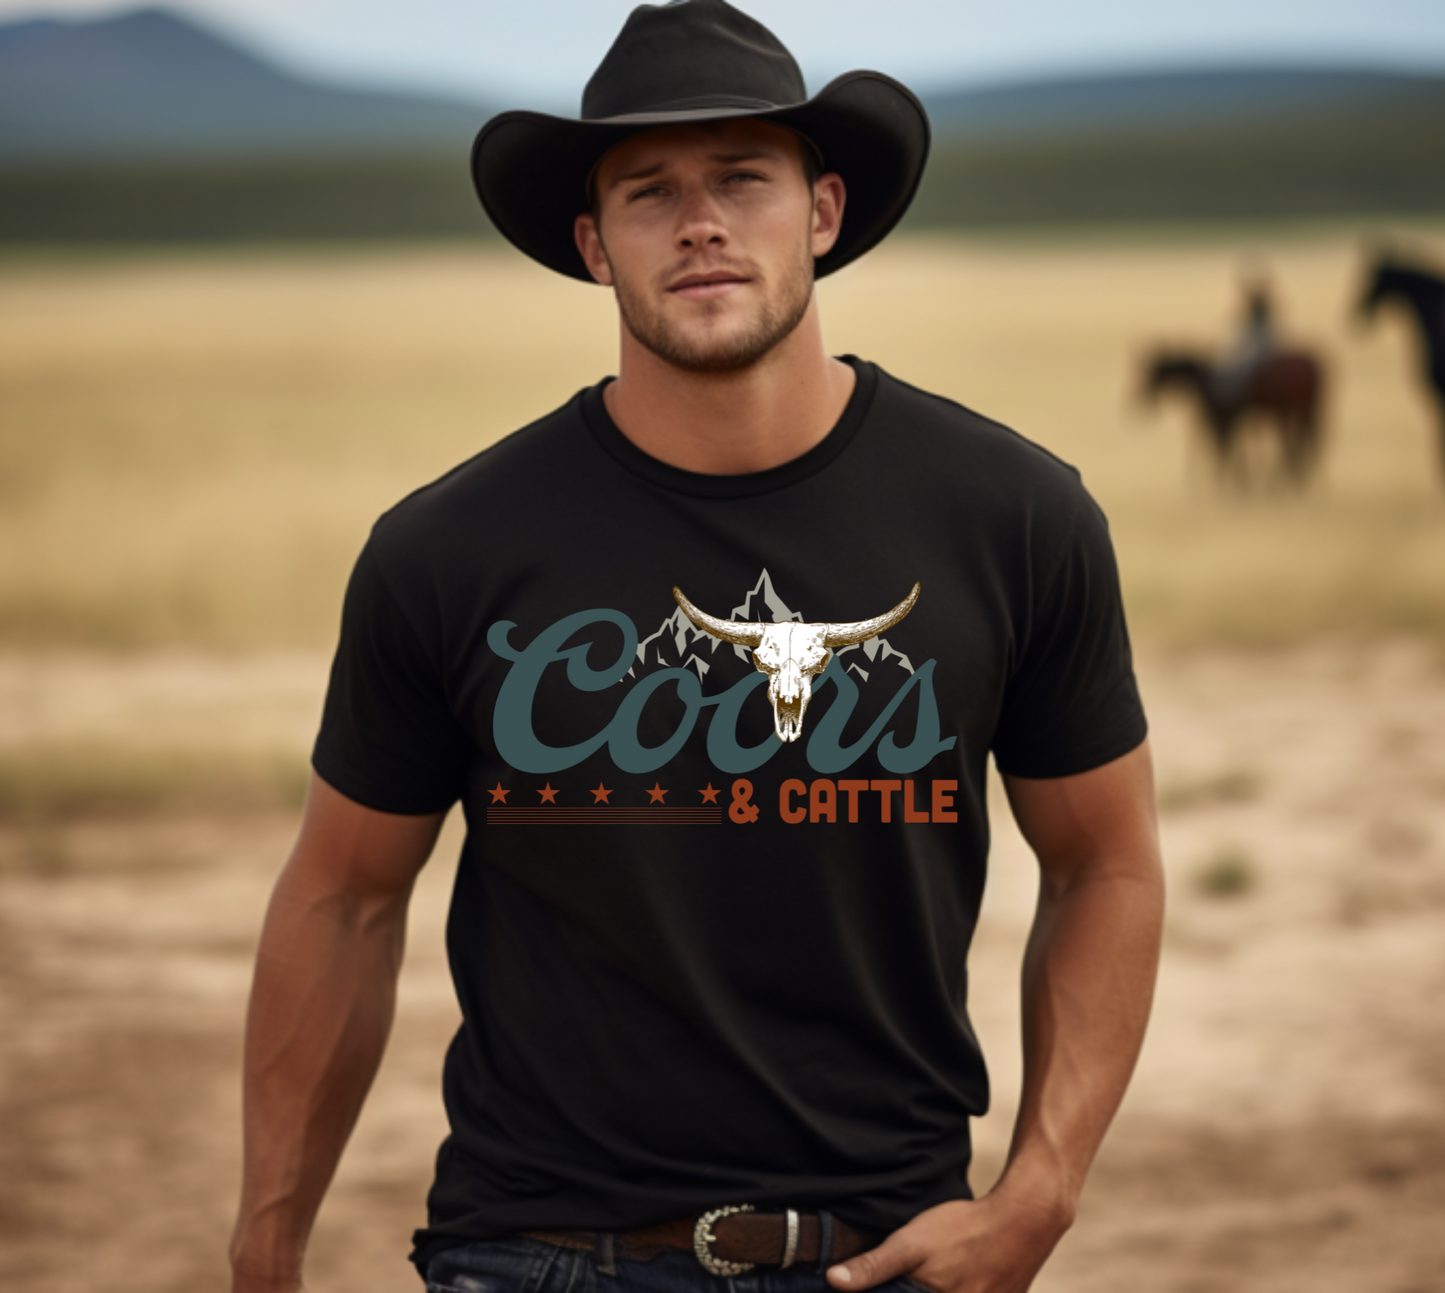 COORS & CATTLE